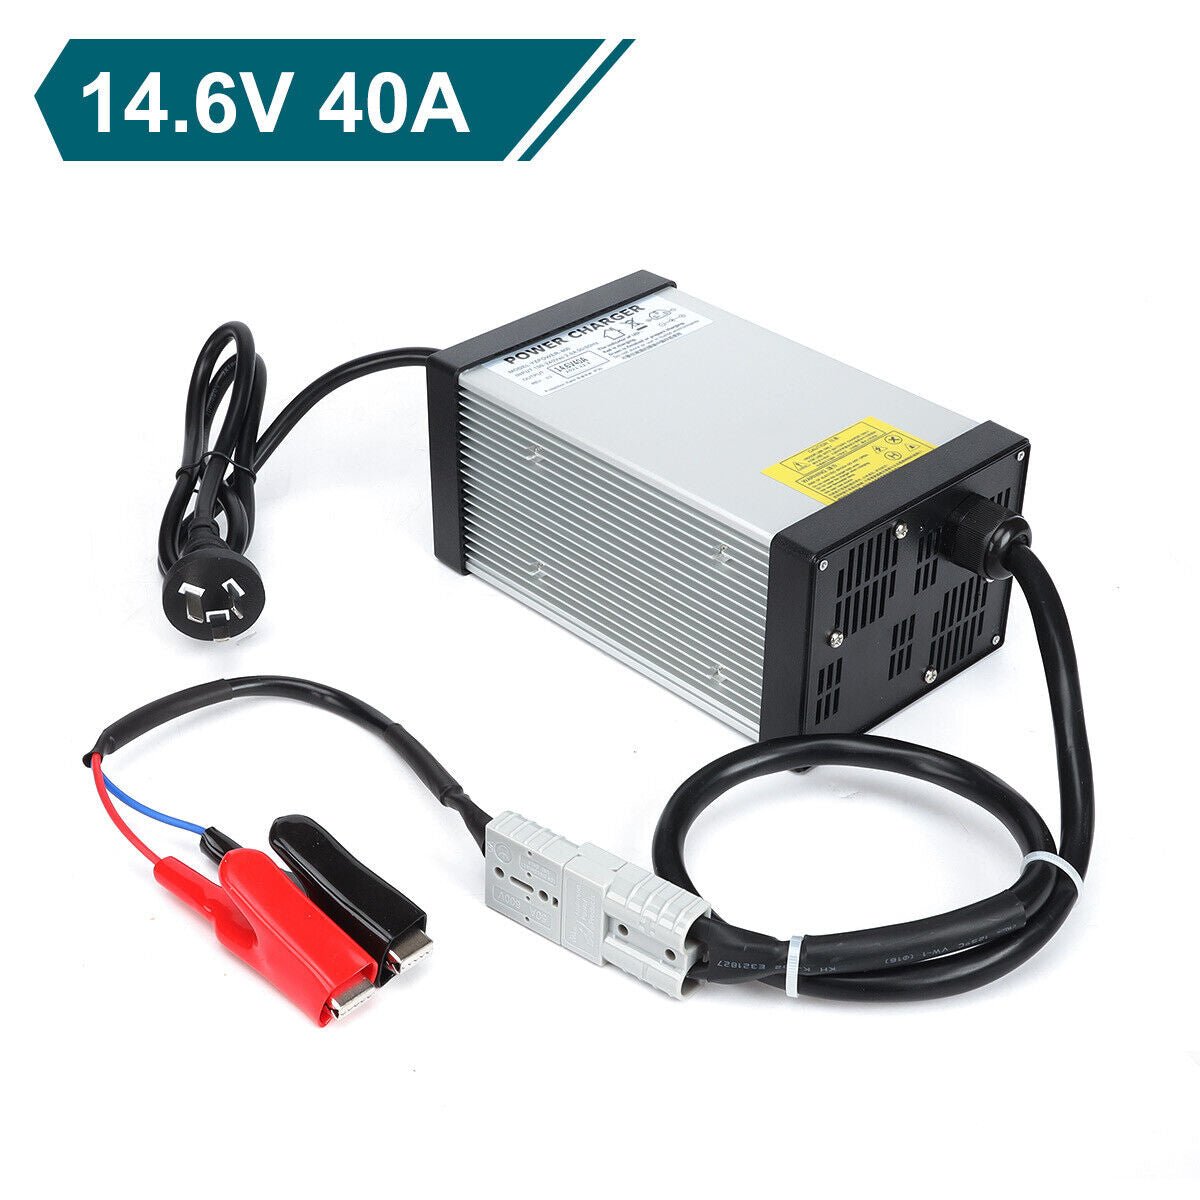 14.6V 12V 40A Lithium Battery Charger For LiFePO4 Lithium Iron Plug Kit - Office Catch